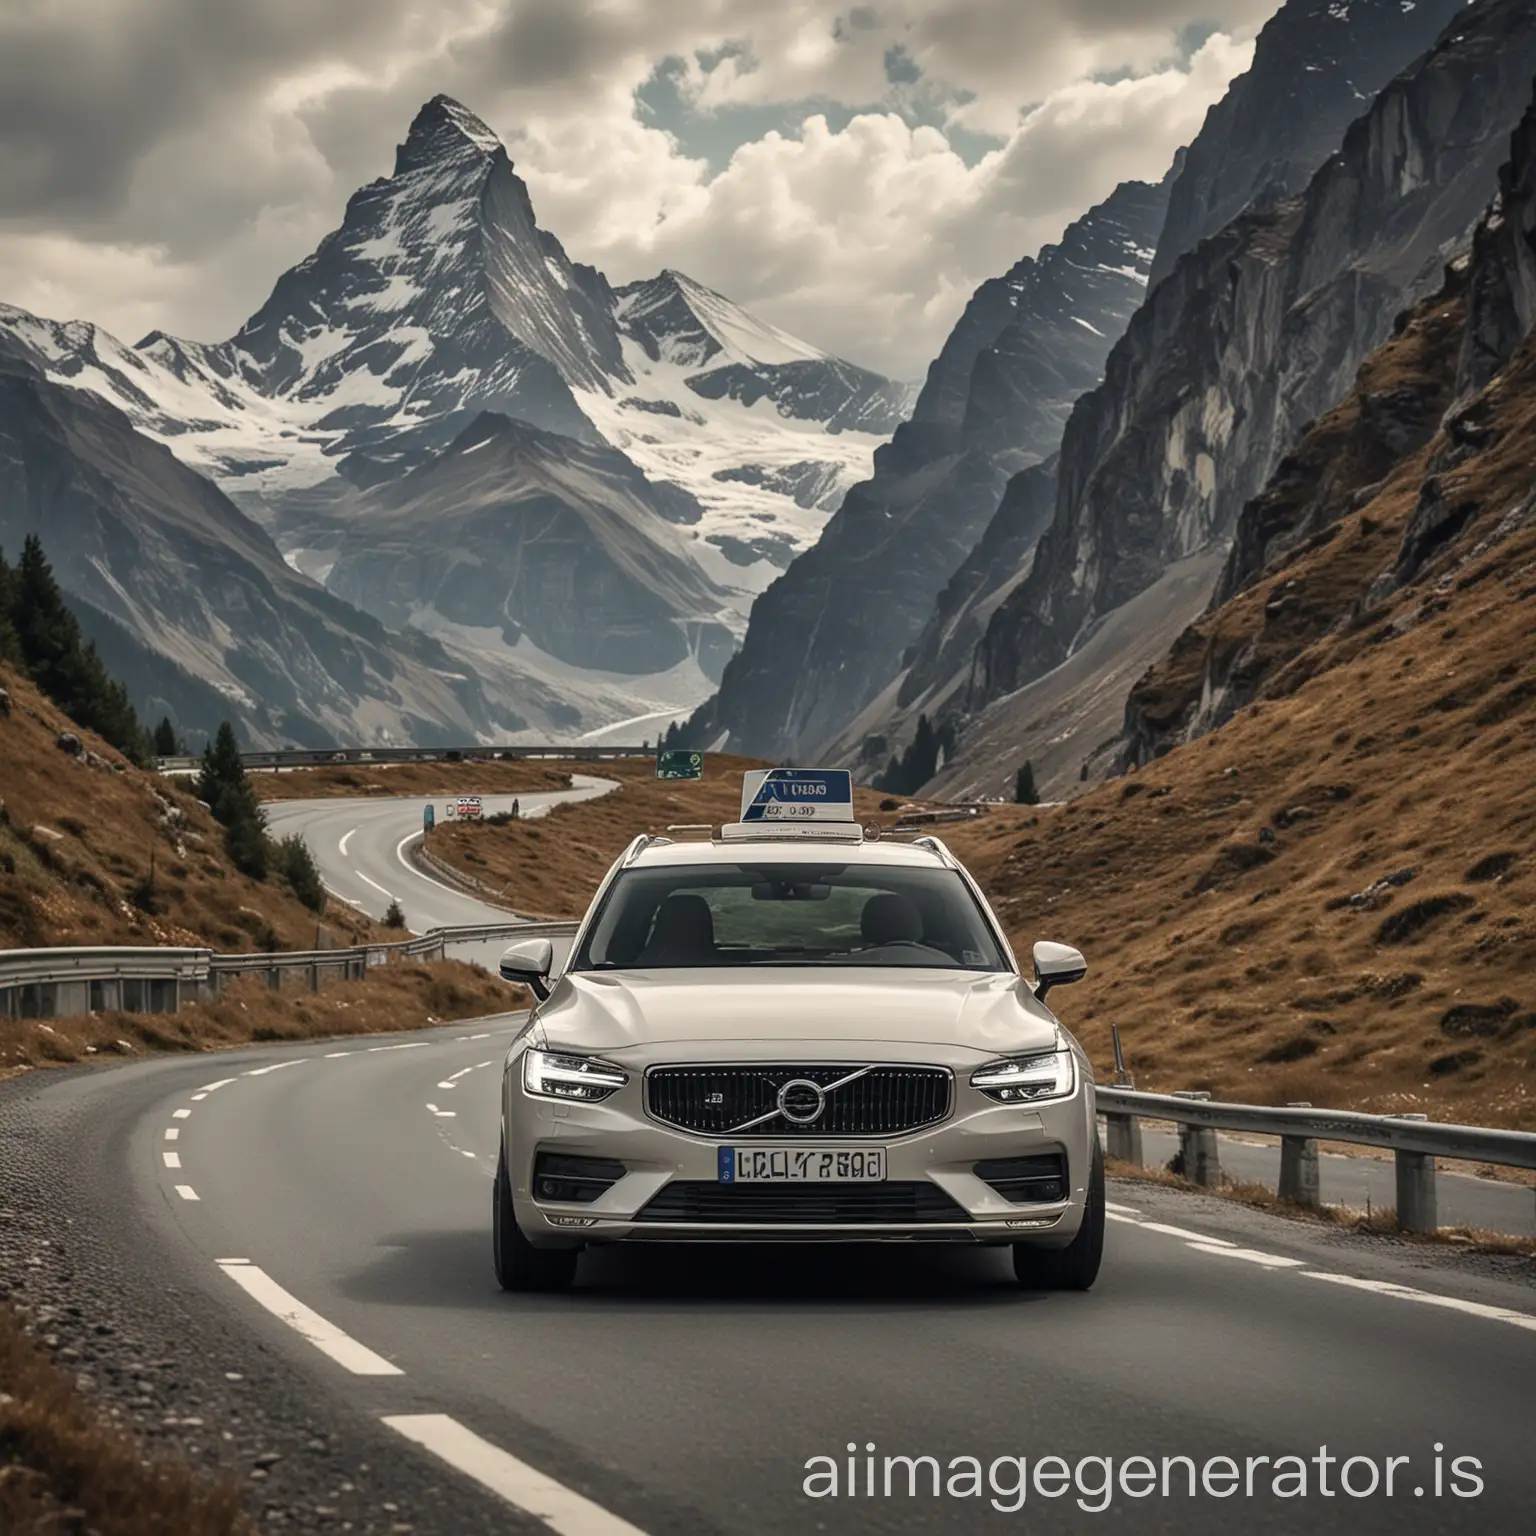 Volvo-and-Kia-CHans-Cruise-Along-Curvy-Mountain-Road-with-Majestic-Matterhorn-View